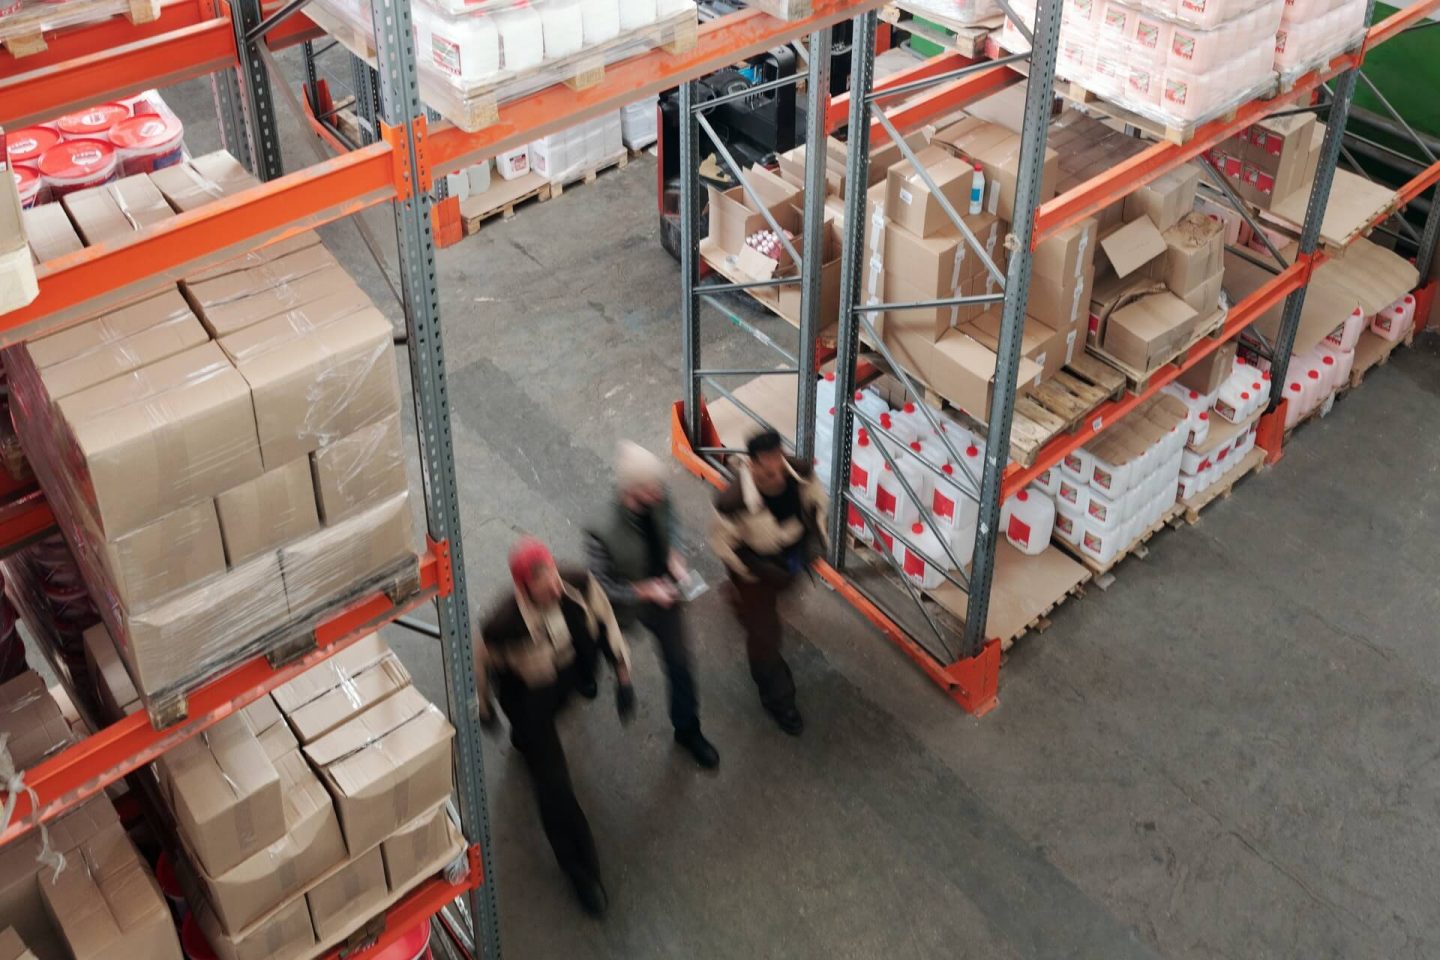 What union action says about warehouse conditions